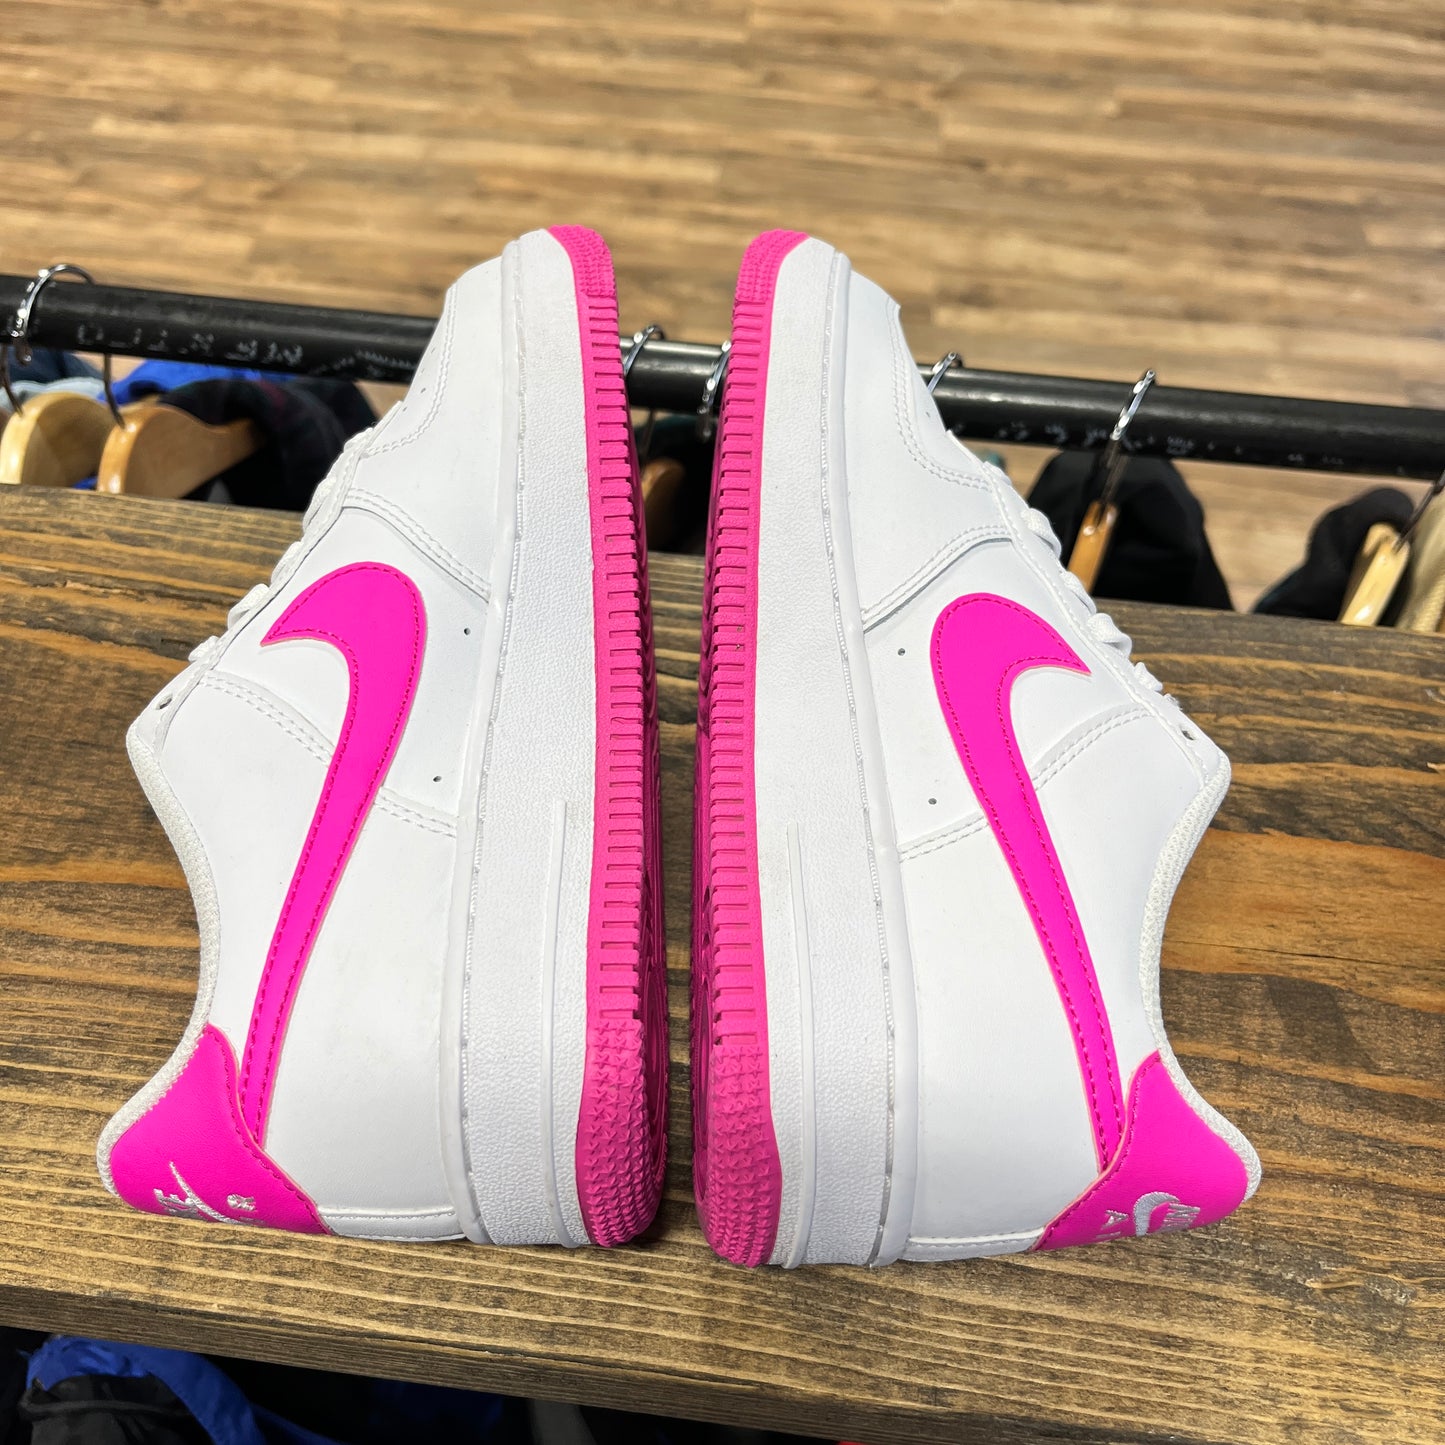 Nike Air Force 1 Low 'White Laser Fuchsia' Size 4.5Y